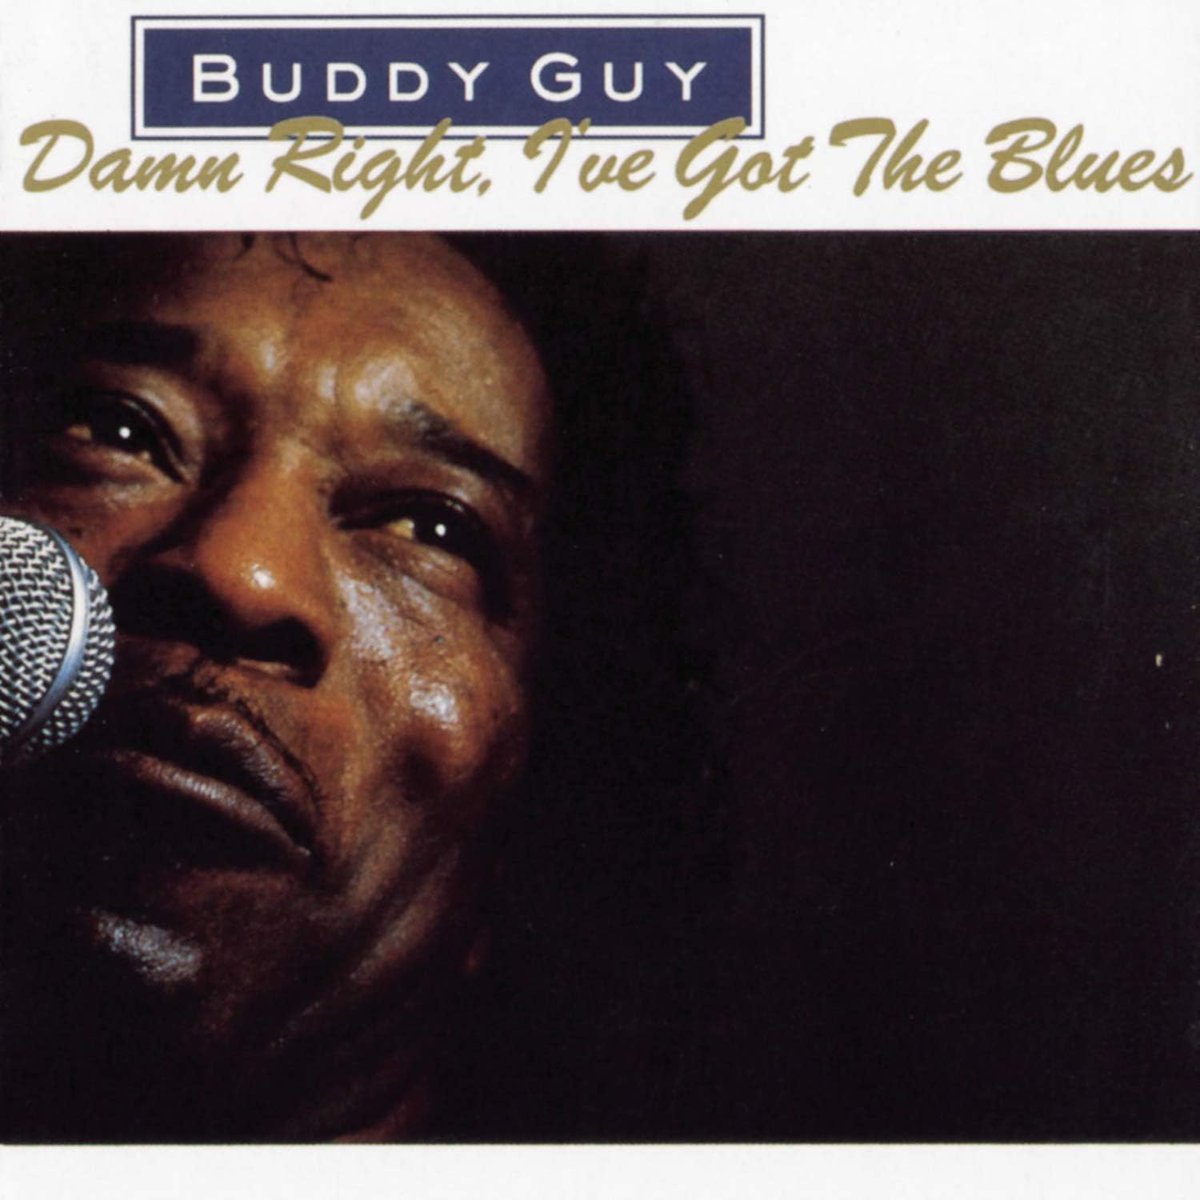 Damn Right, I've Got the Blues is the studio album by Blues guitarist Buddy Guy. 

The album has been described by Allmusic and Rolling Stone as a commercial comeback album for Guy after limited recording for the previous 10 years. 

#BuddyGuy